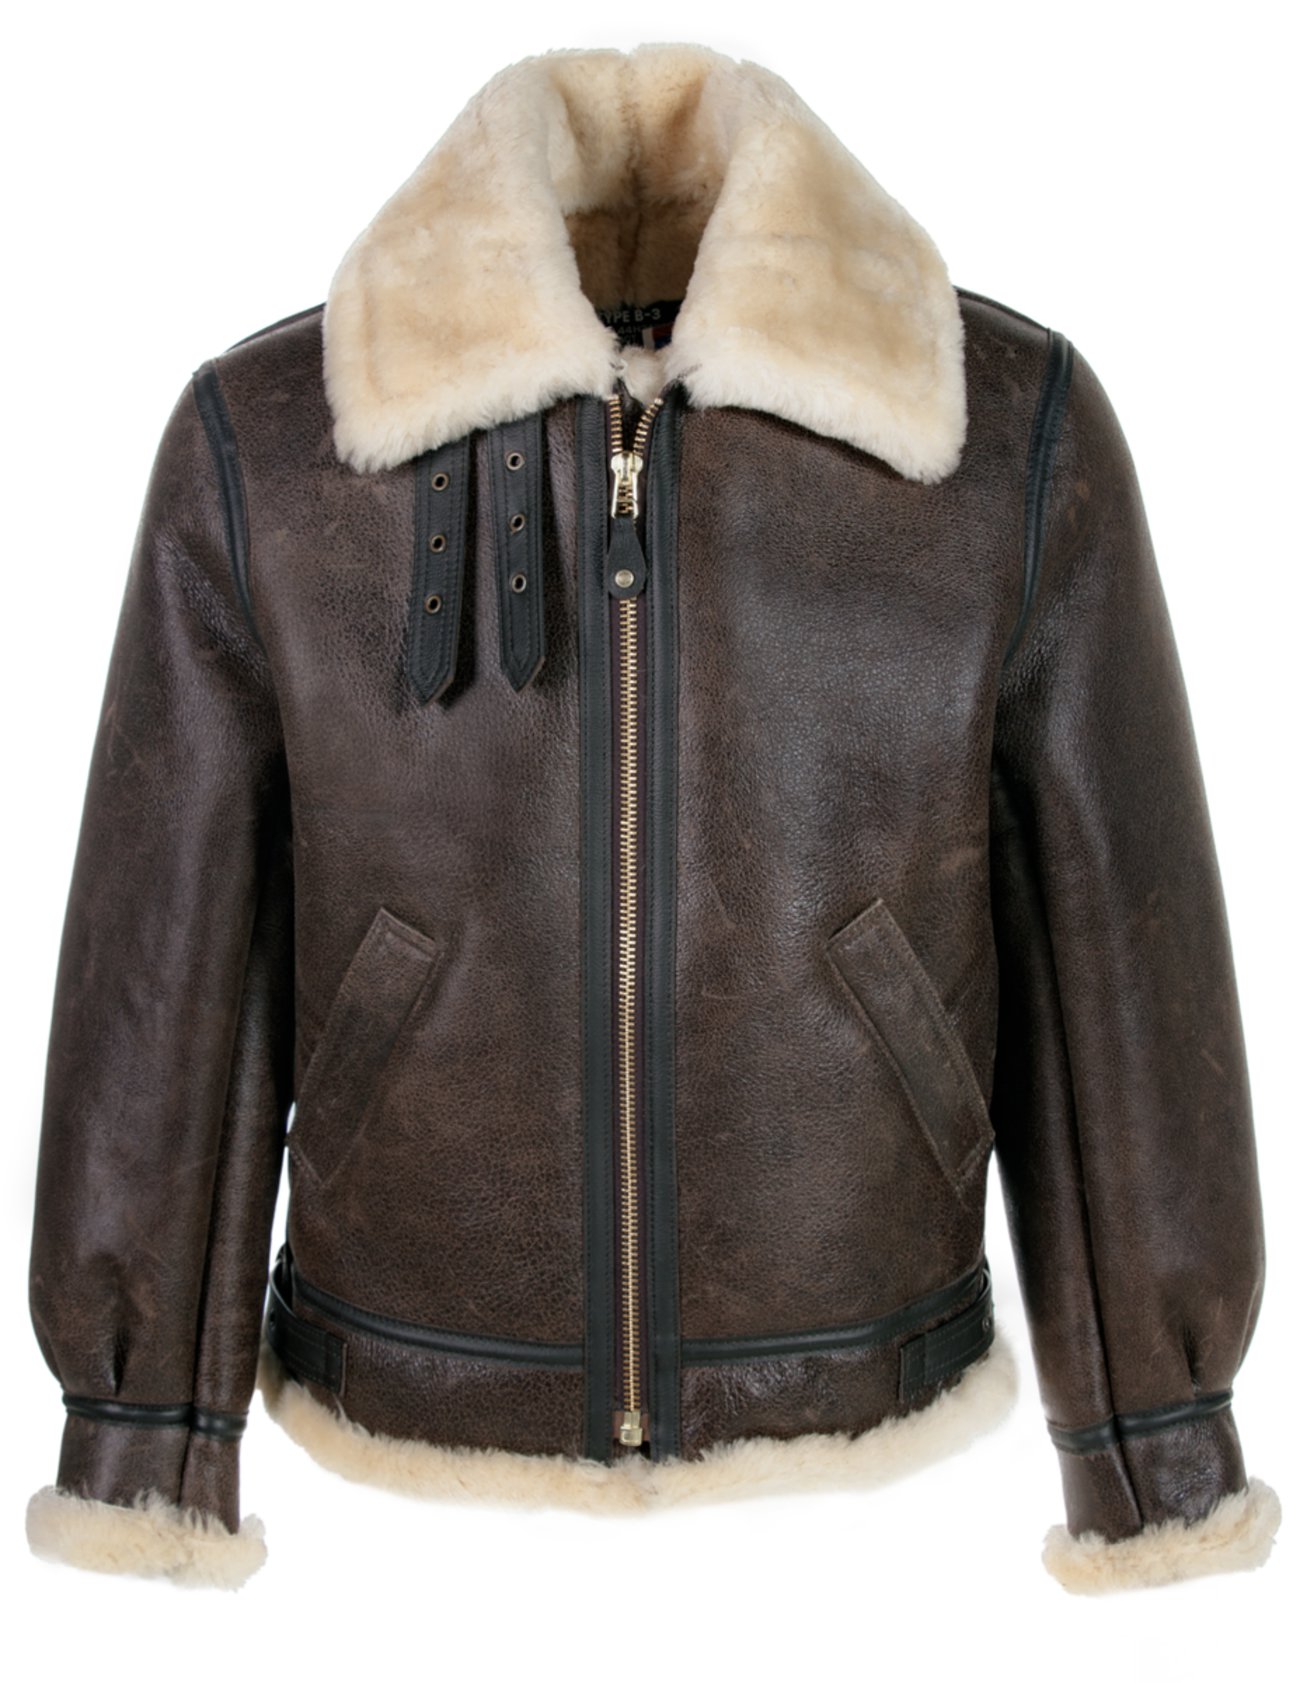 Leon's real leather bomber jacket